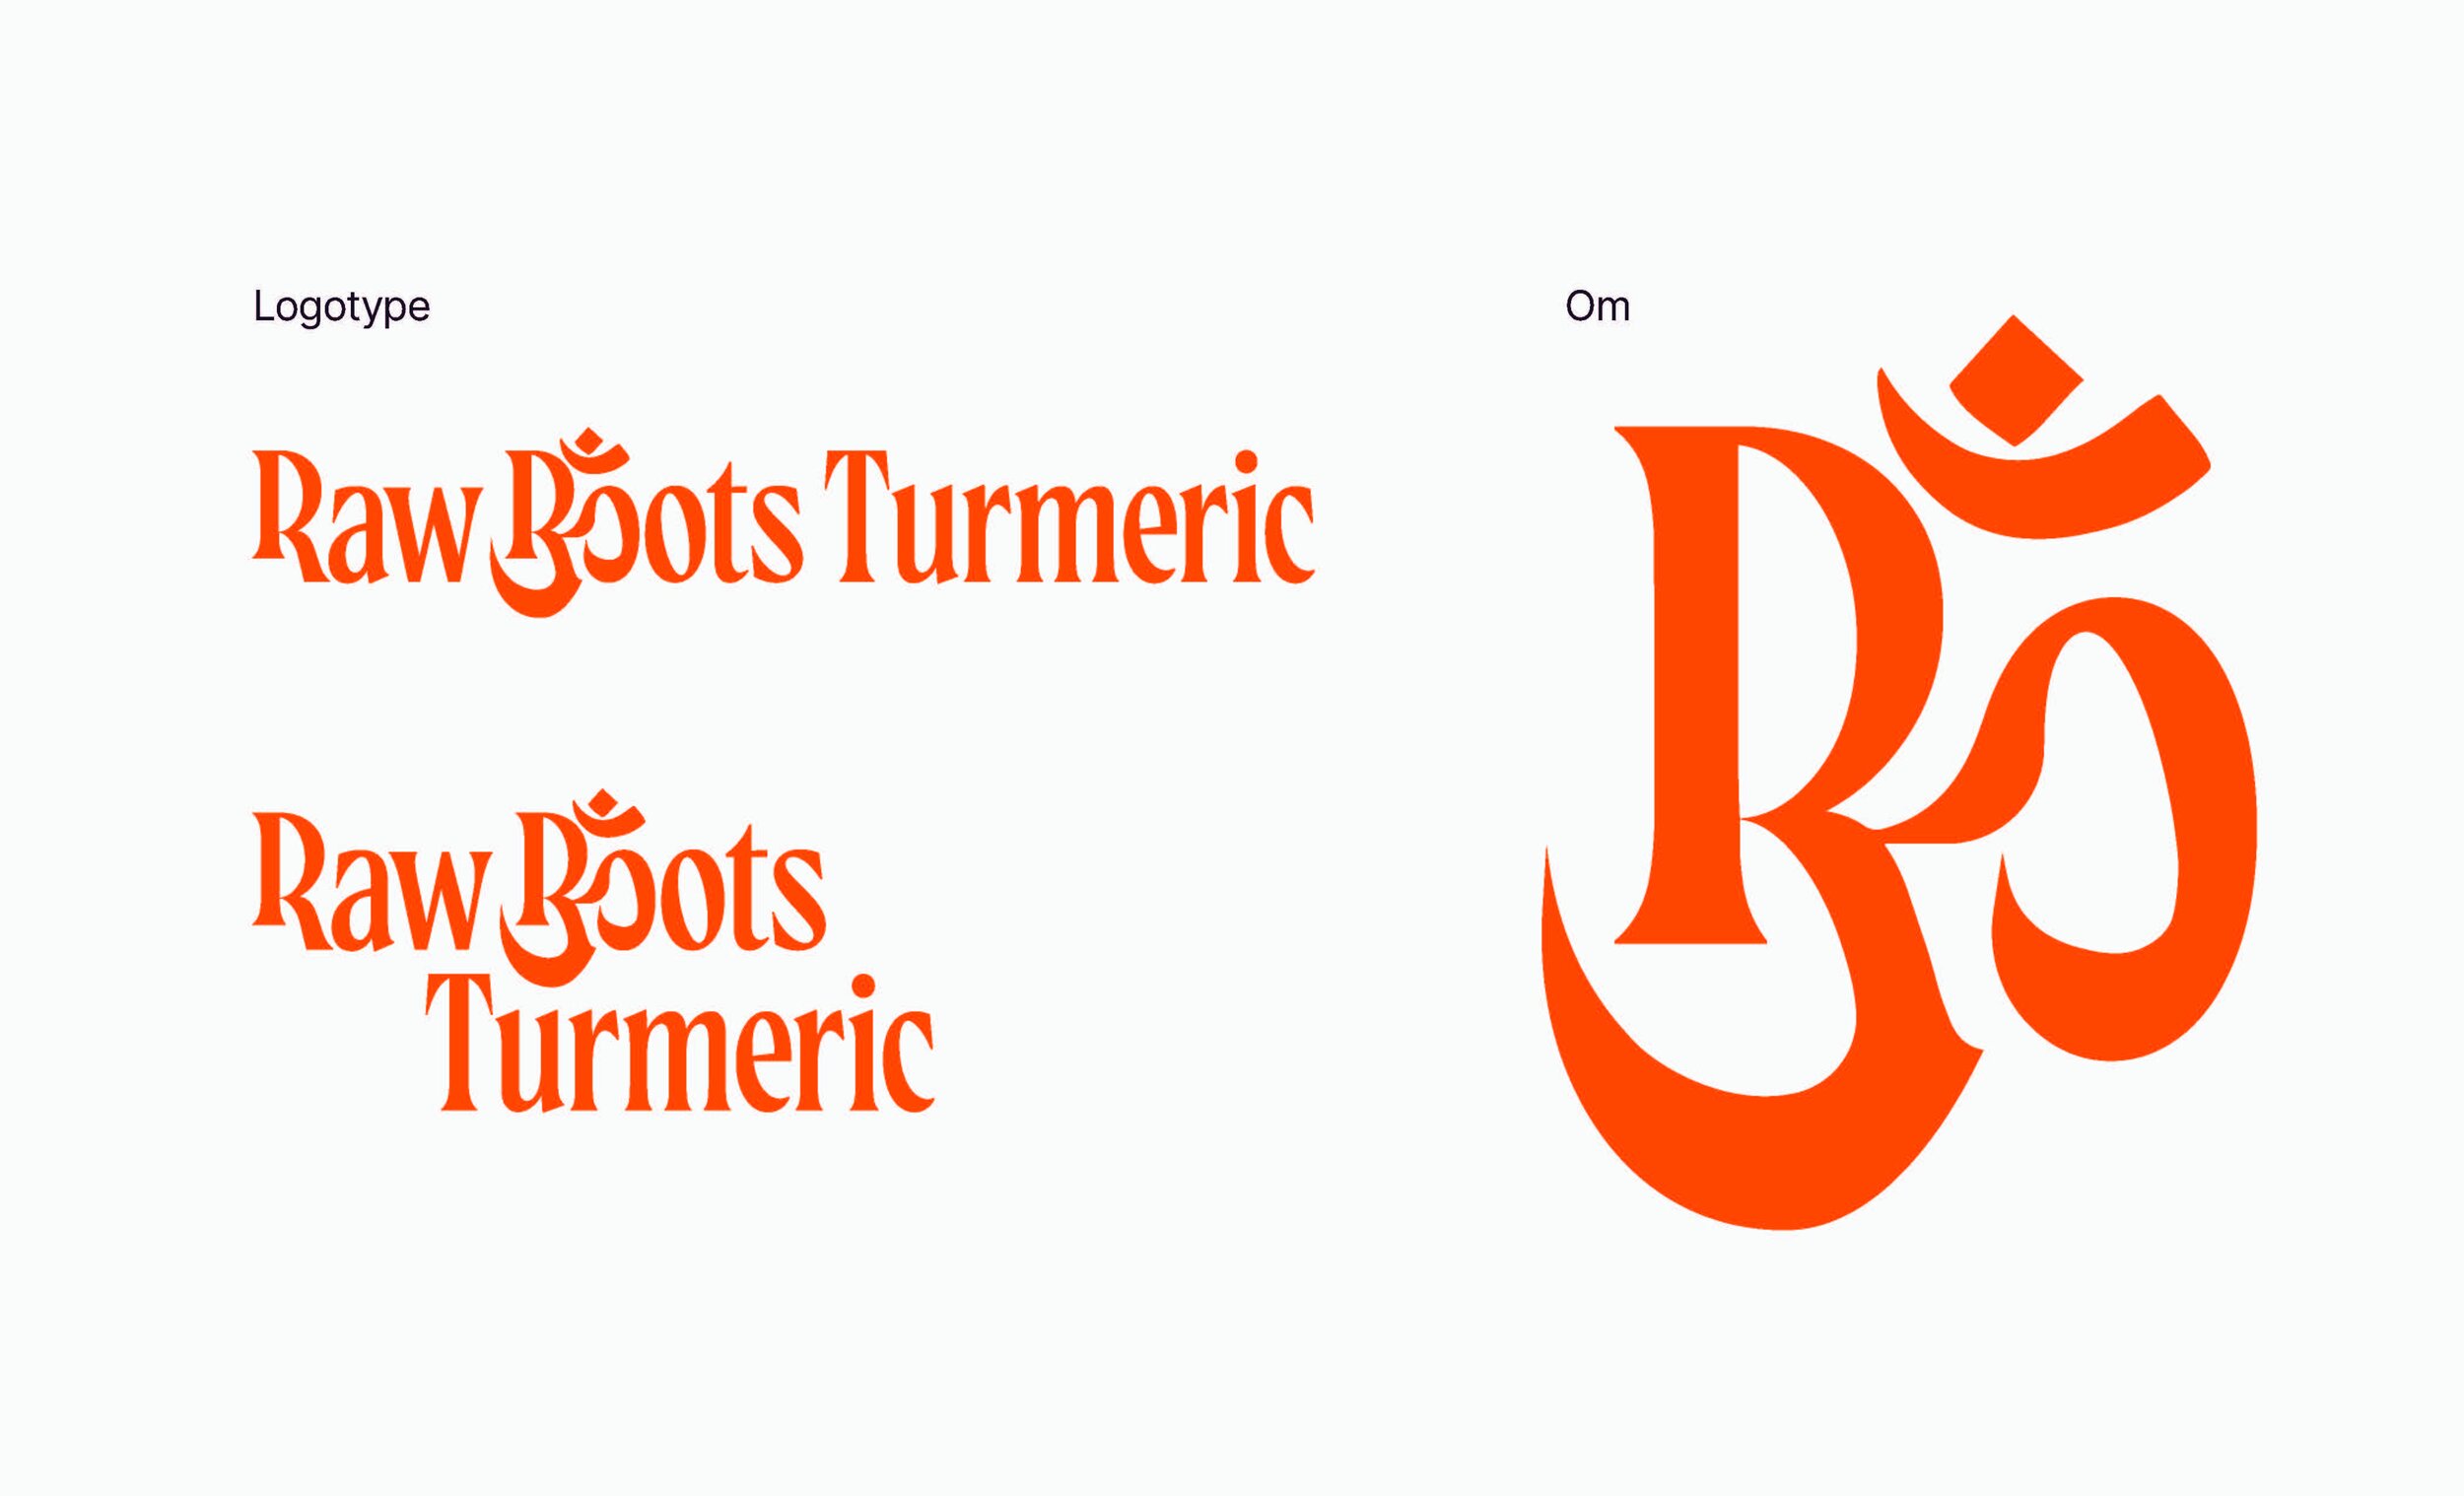  Raw Roots Turmeric designed logotype and logo with different formatting. 